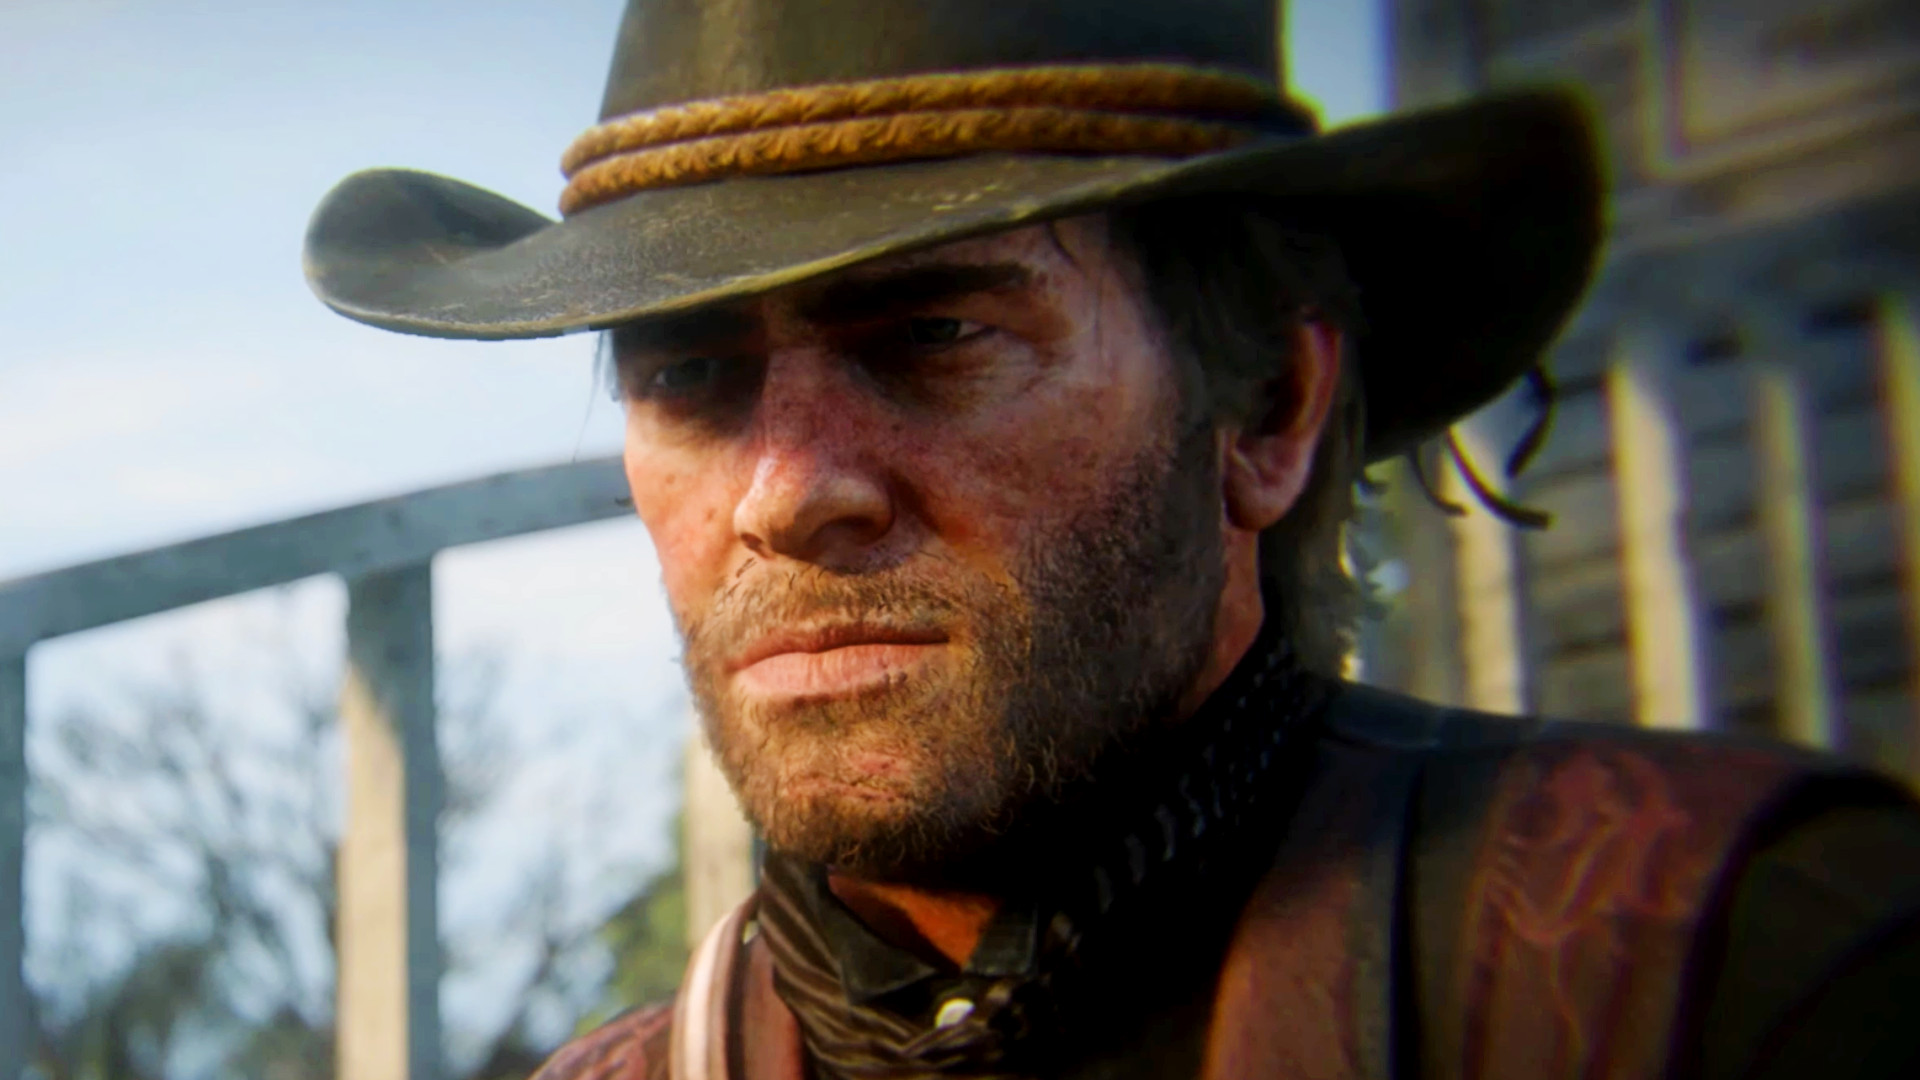 Red Dead Redemption 2 Hits New All-Time Concurrent Player Record